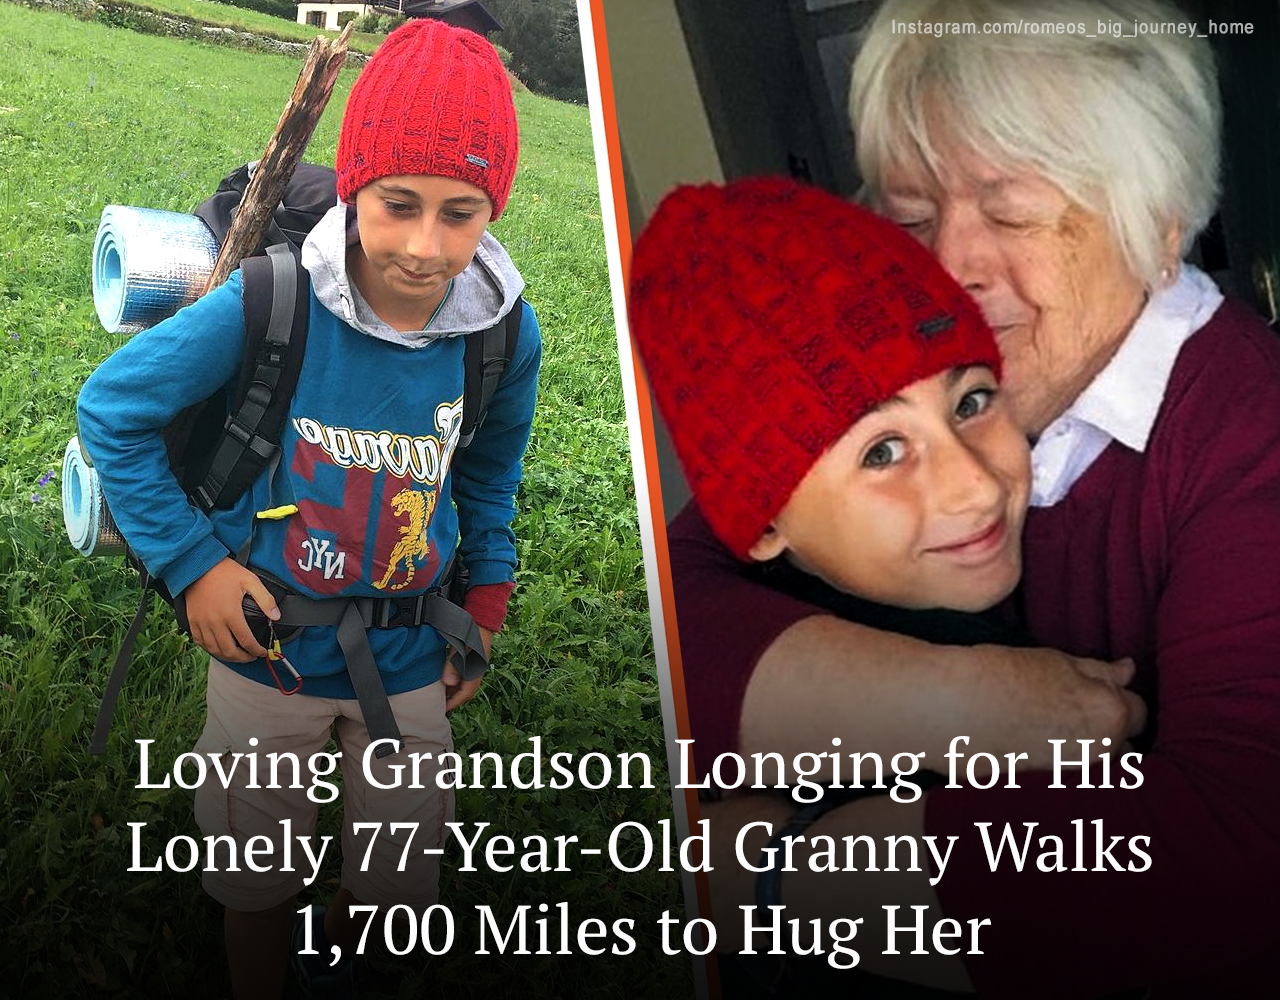 Romeo Cox, 11, could no longer bear the separation from his 77-year-old granny Rosemary, so he decided to go on a 1,700-mile journey, mostly on foot, just to give her “the best hug ever” 93 days later.